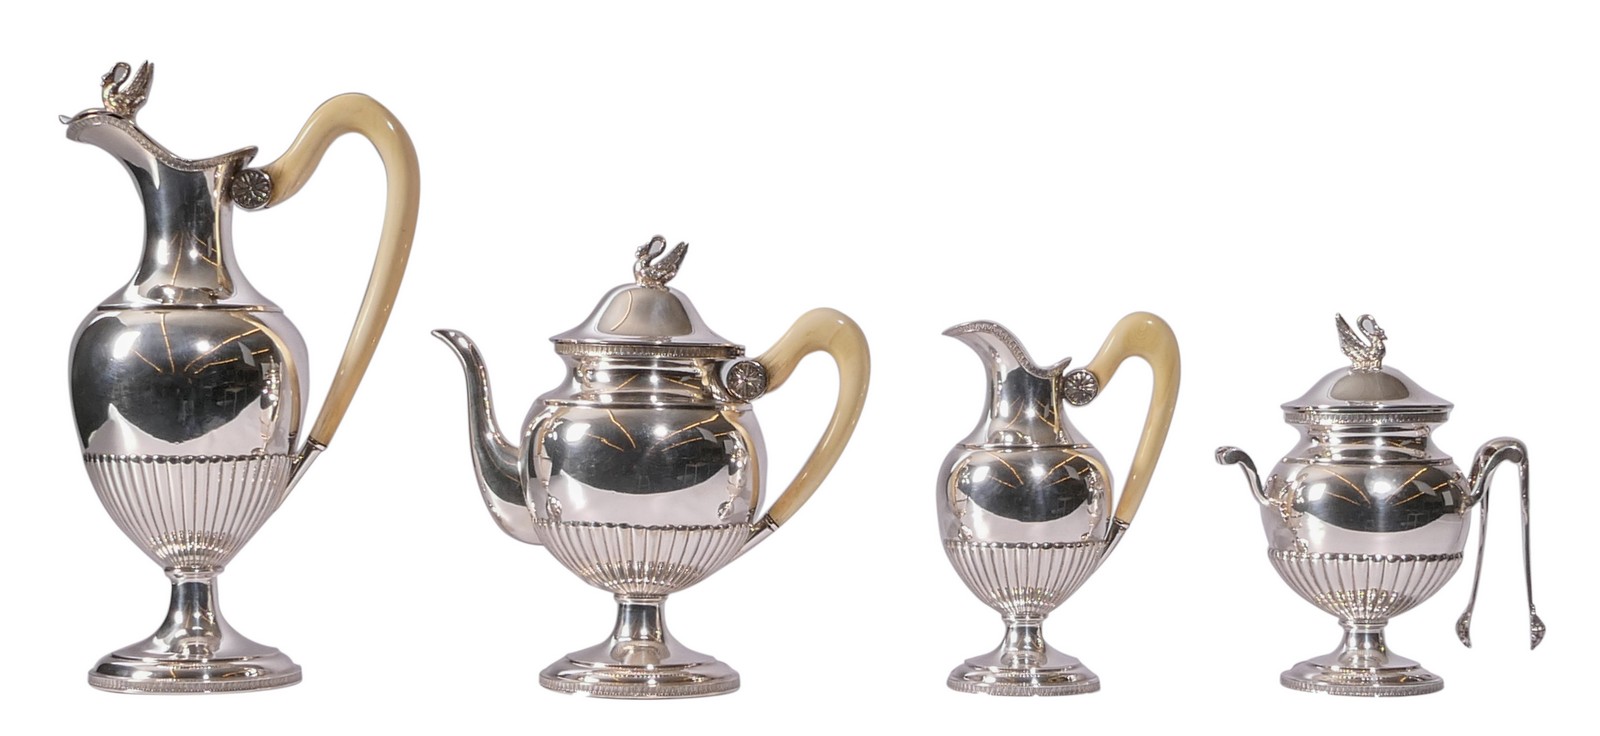 A four-piece silver tea and coffee set with ivory handles, Wolf-Zondervan, 835/000, 1942-1954; added